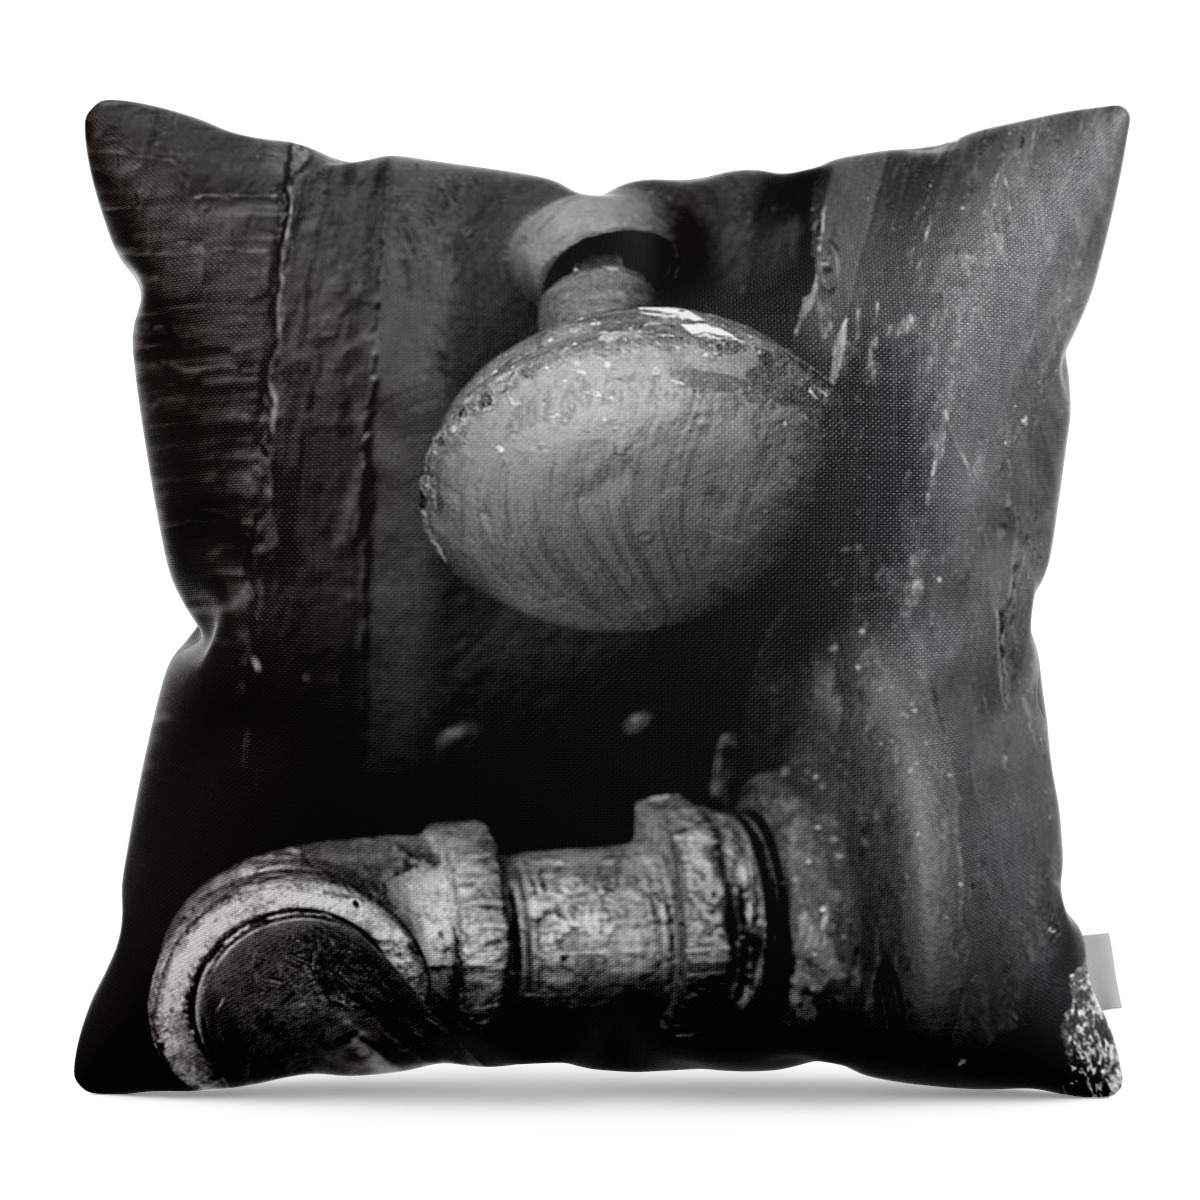 Black And White Throw Pillow featuring the photograph The Cellar by Ron Cline